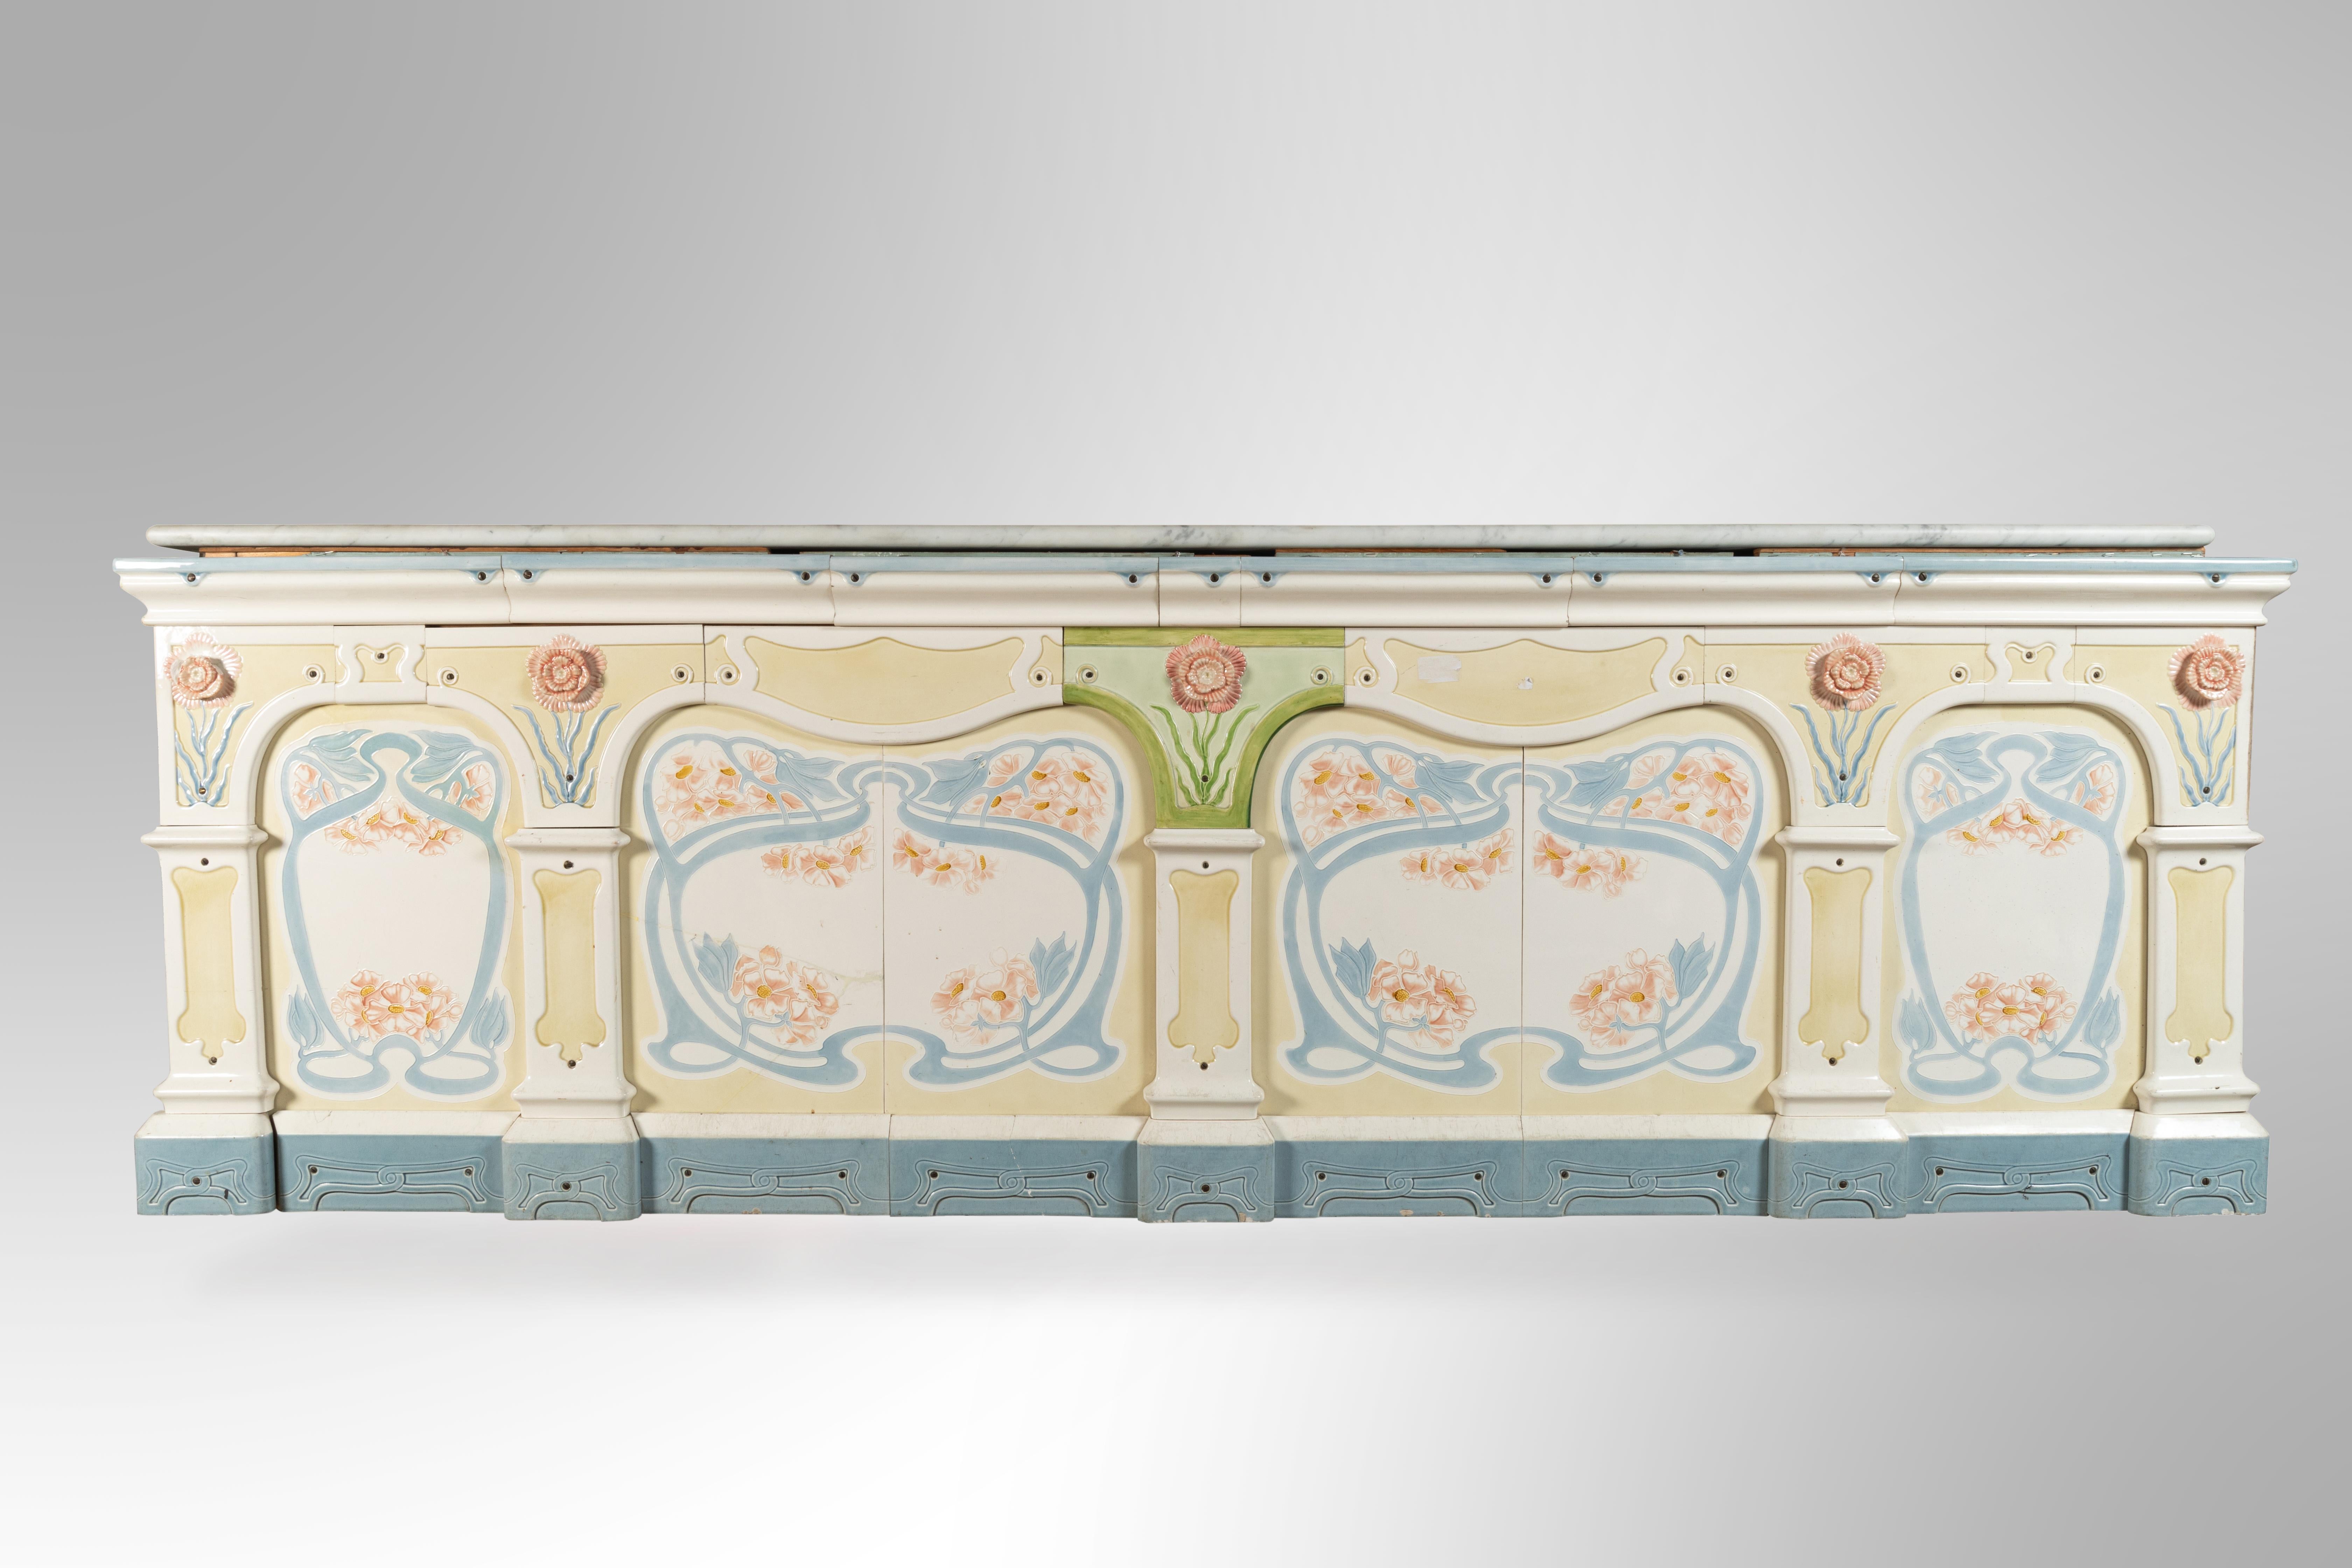 Rare dairy store creamery counter in colored earthenware, Circa 1900 period. White and grey marble top. This case piece bears the label - Heinrich Nax, Frankfurt. Minor restorations needed.